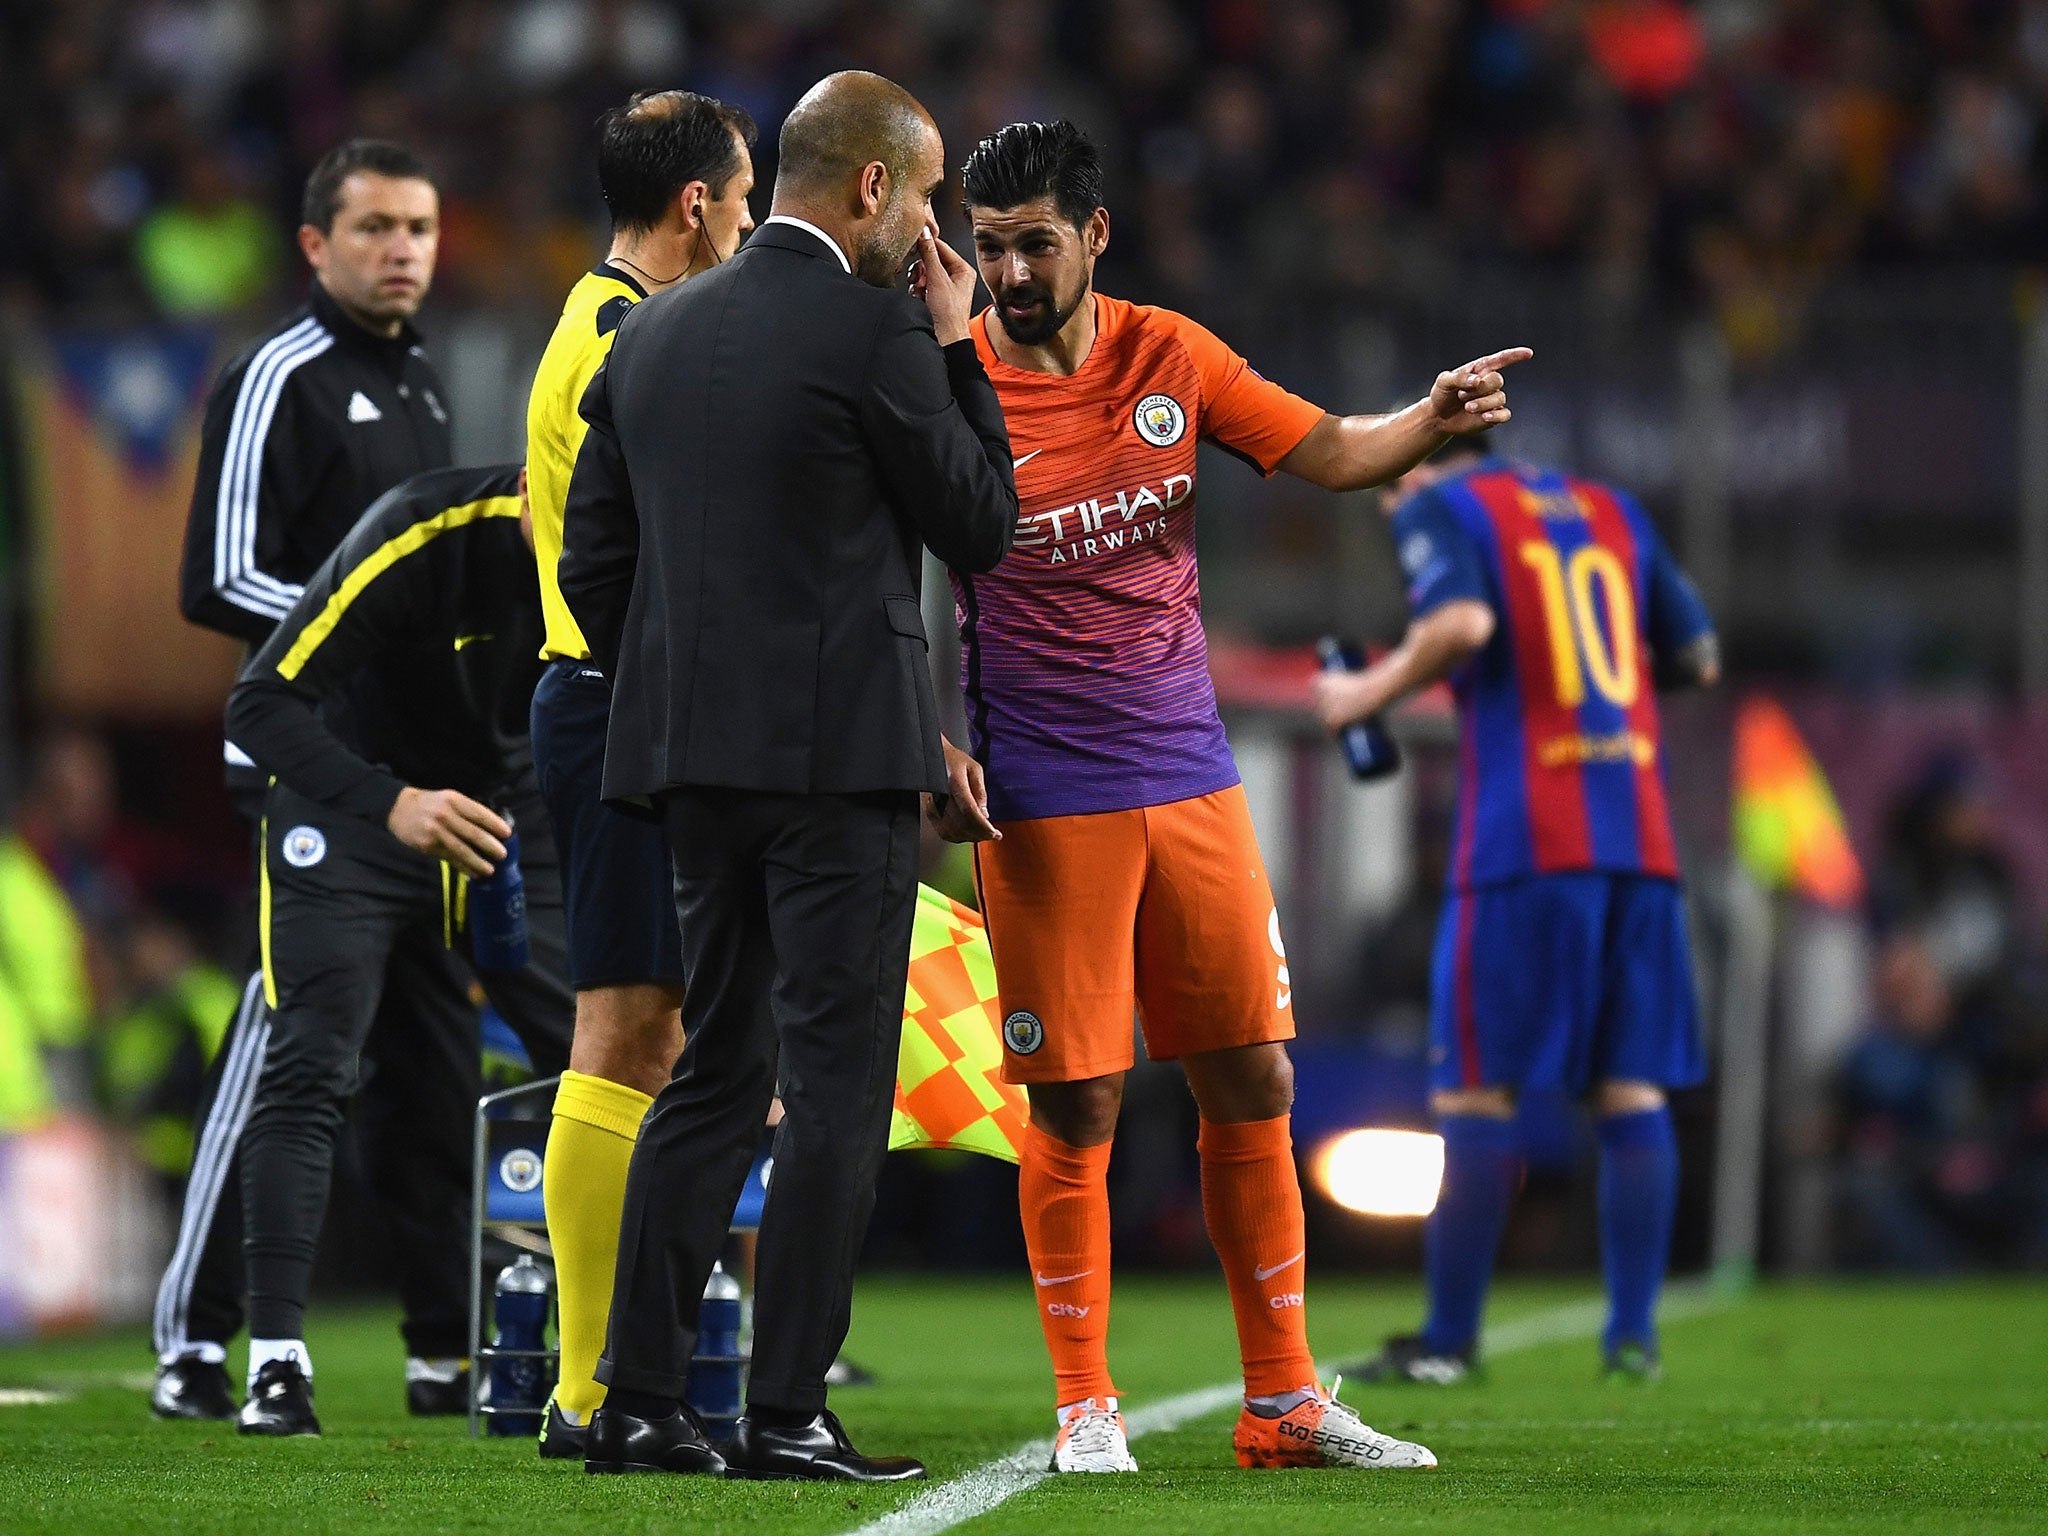 Nolito struggled to understand what Guardiola was saying after the match